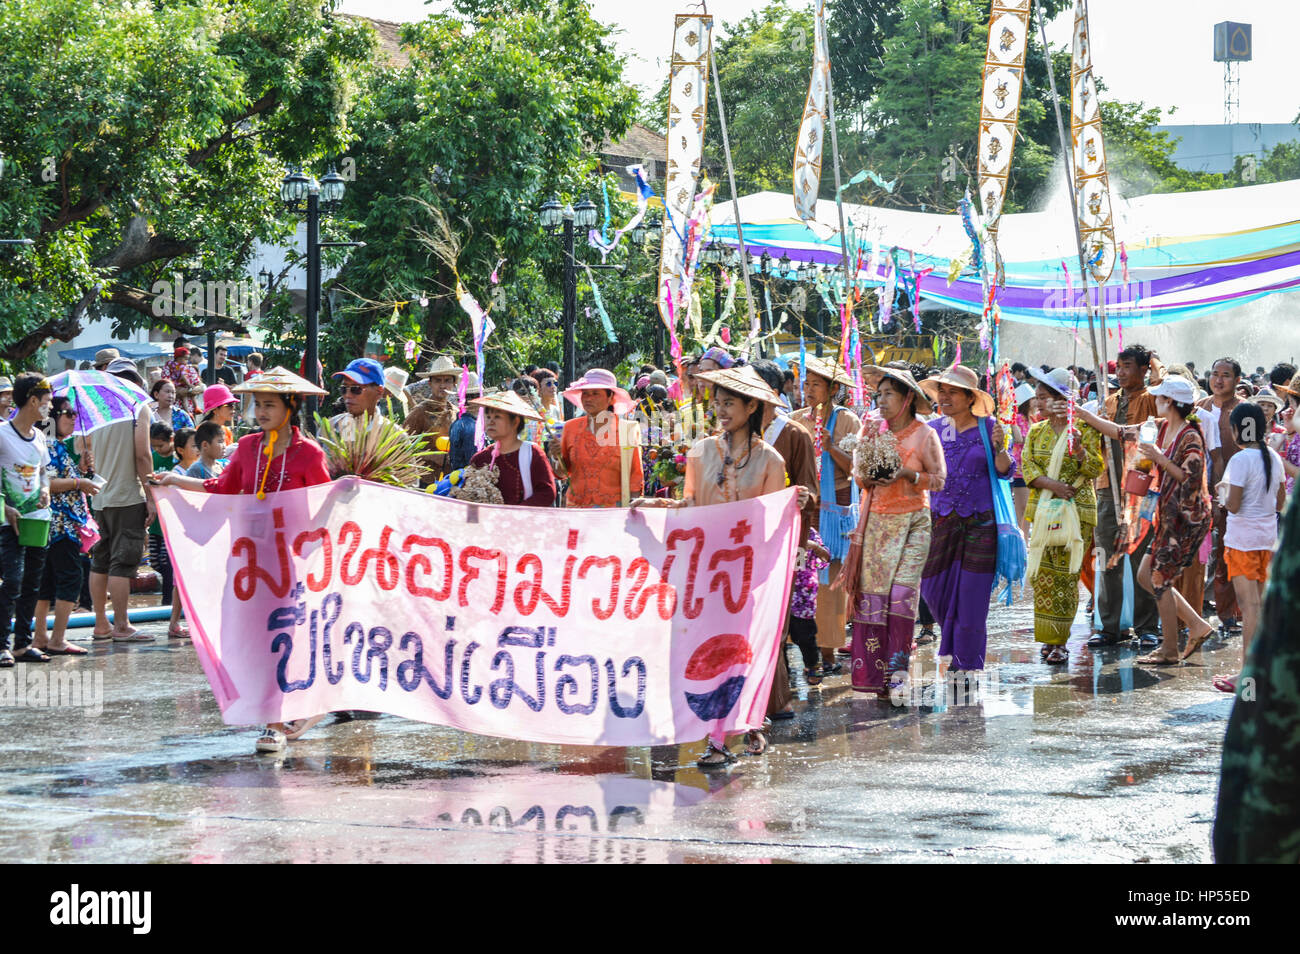 Chiang Rai, Thailand - April 12, 2015 : The Songkran festival parade. Songkran is the holiday known for its water festival. Stock Photo